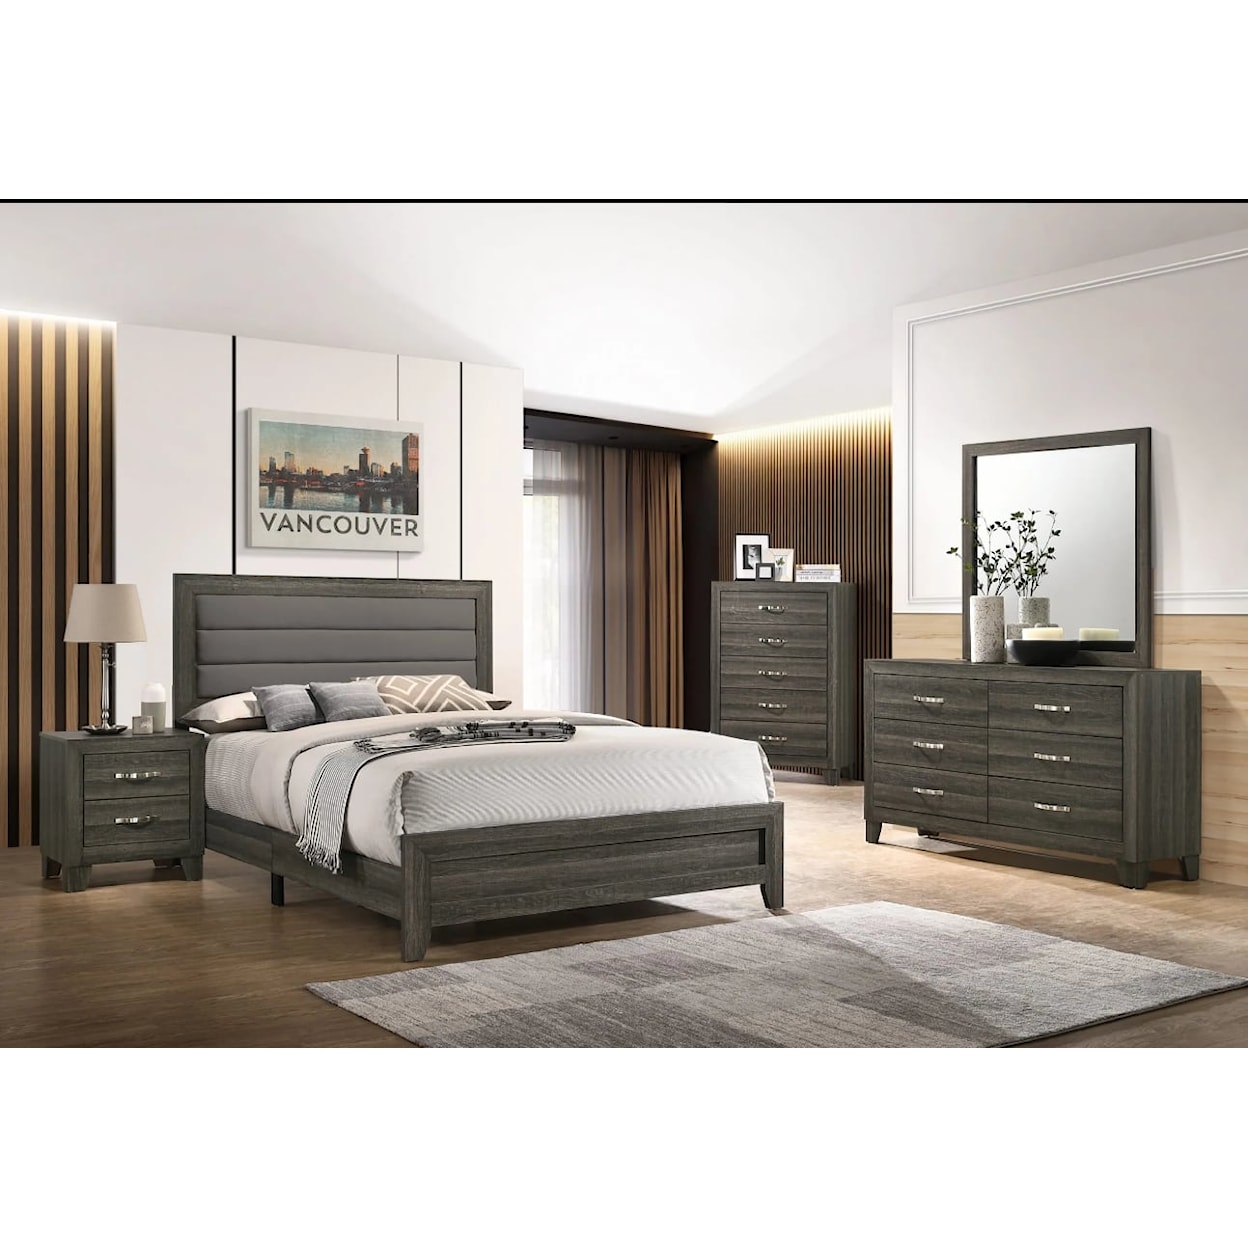 Furniture World Distributors Vancouver VANCOUVER GREY FULL BED |